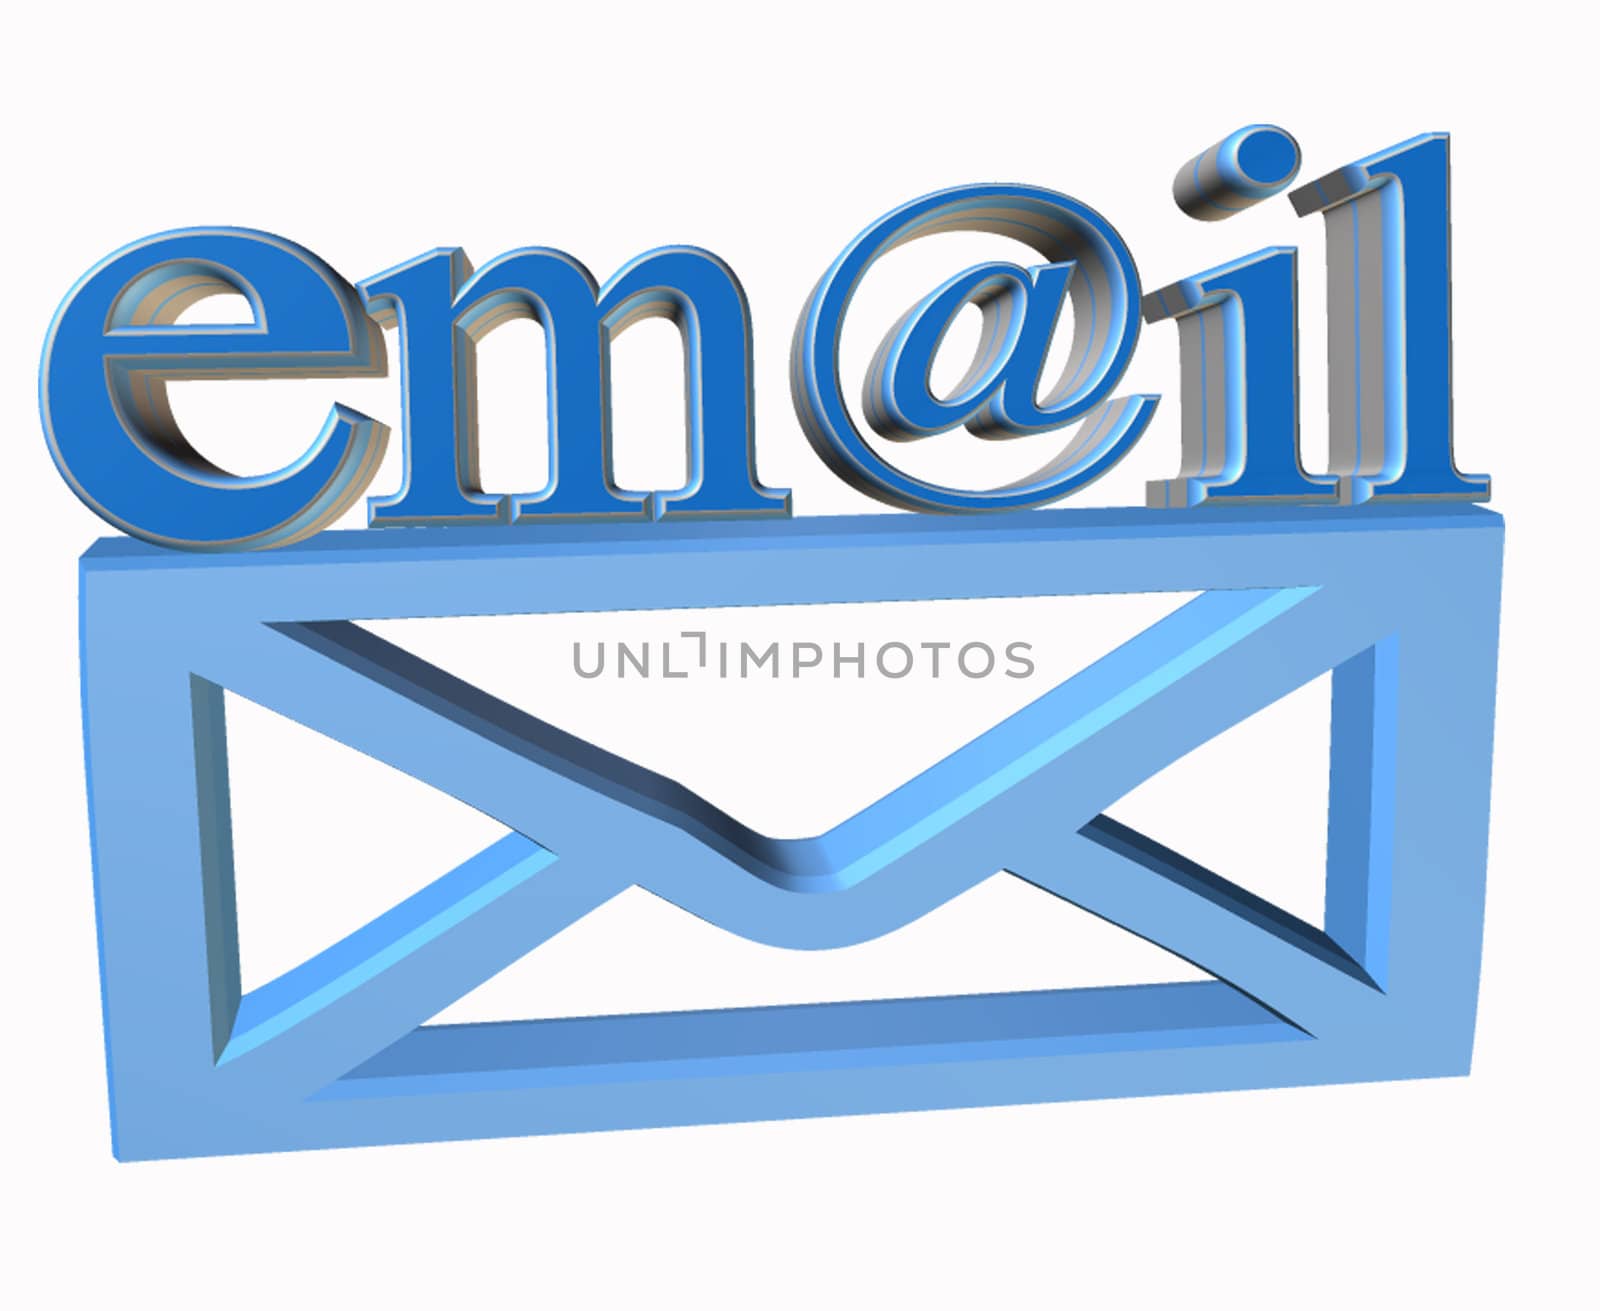 3d email text and envelope by nadil